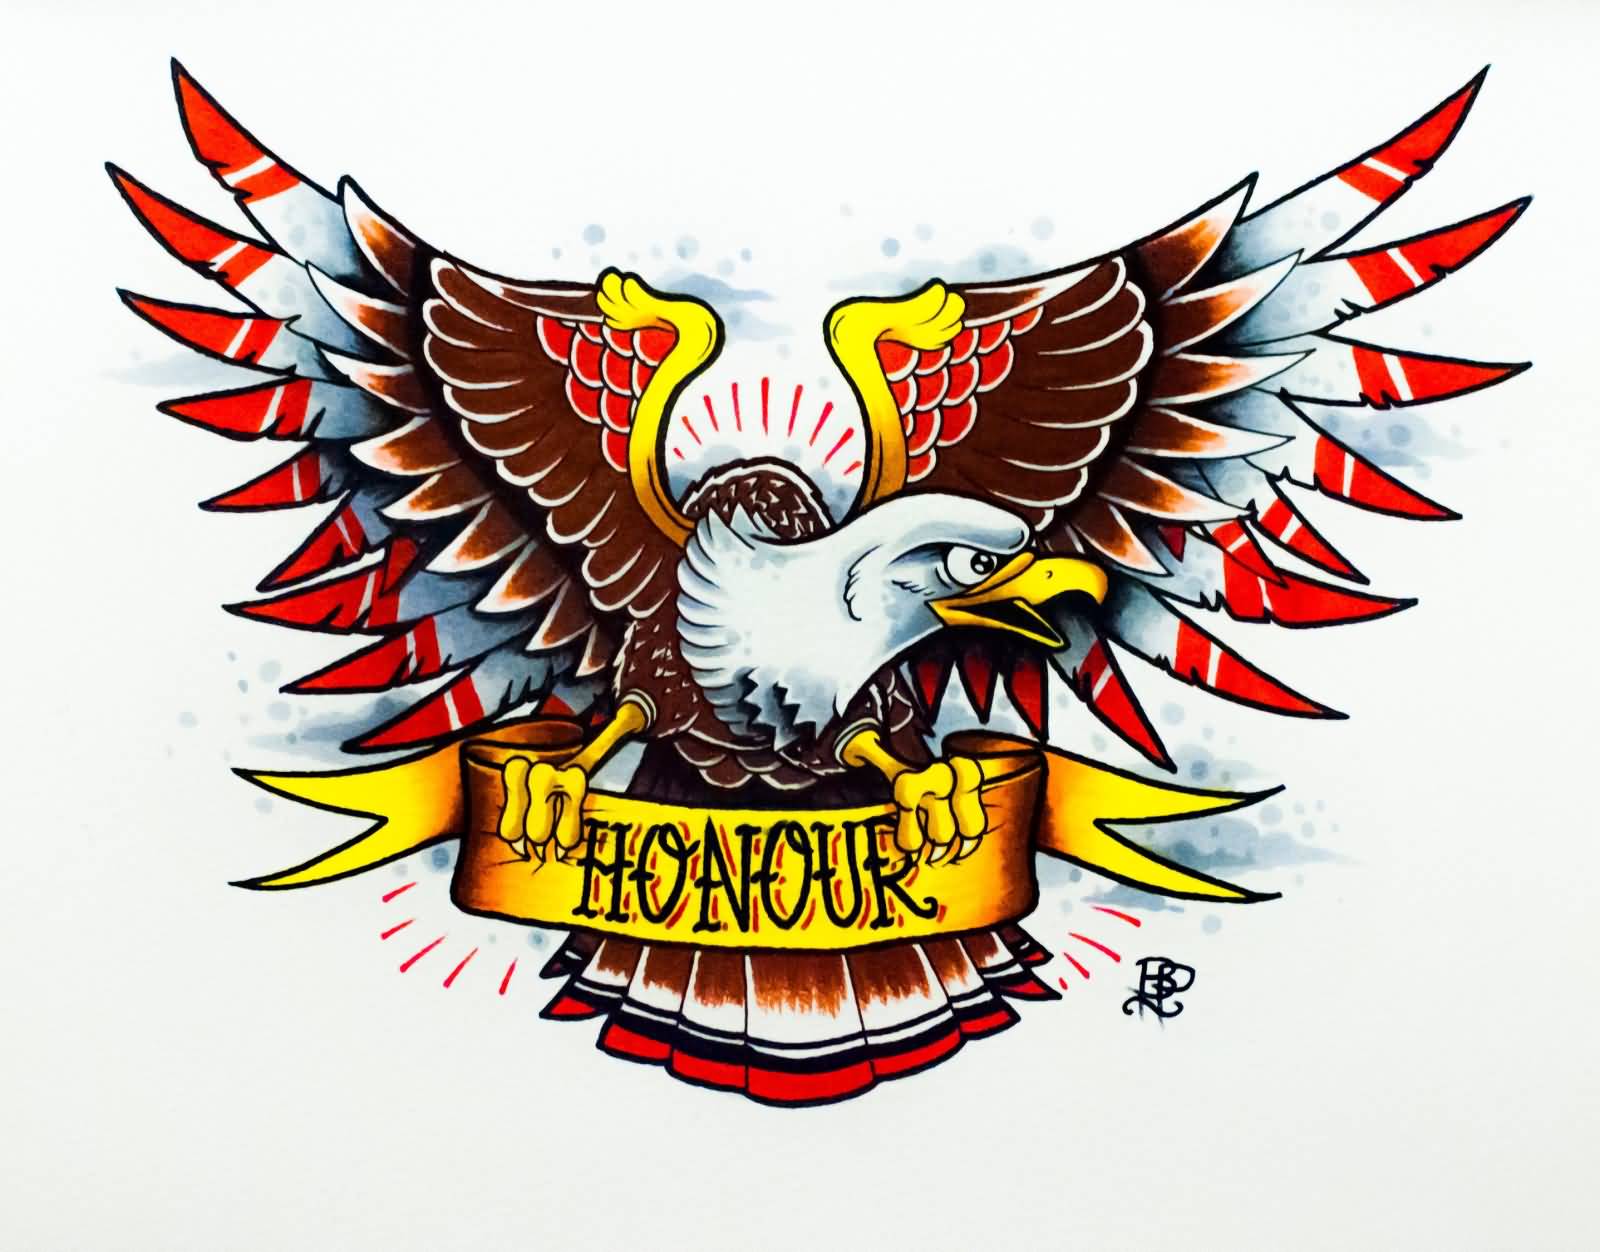 Wonderful Old School Eagle With Banner Tattoo Design By TheBrokenpuppet